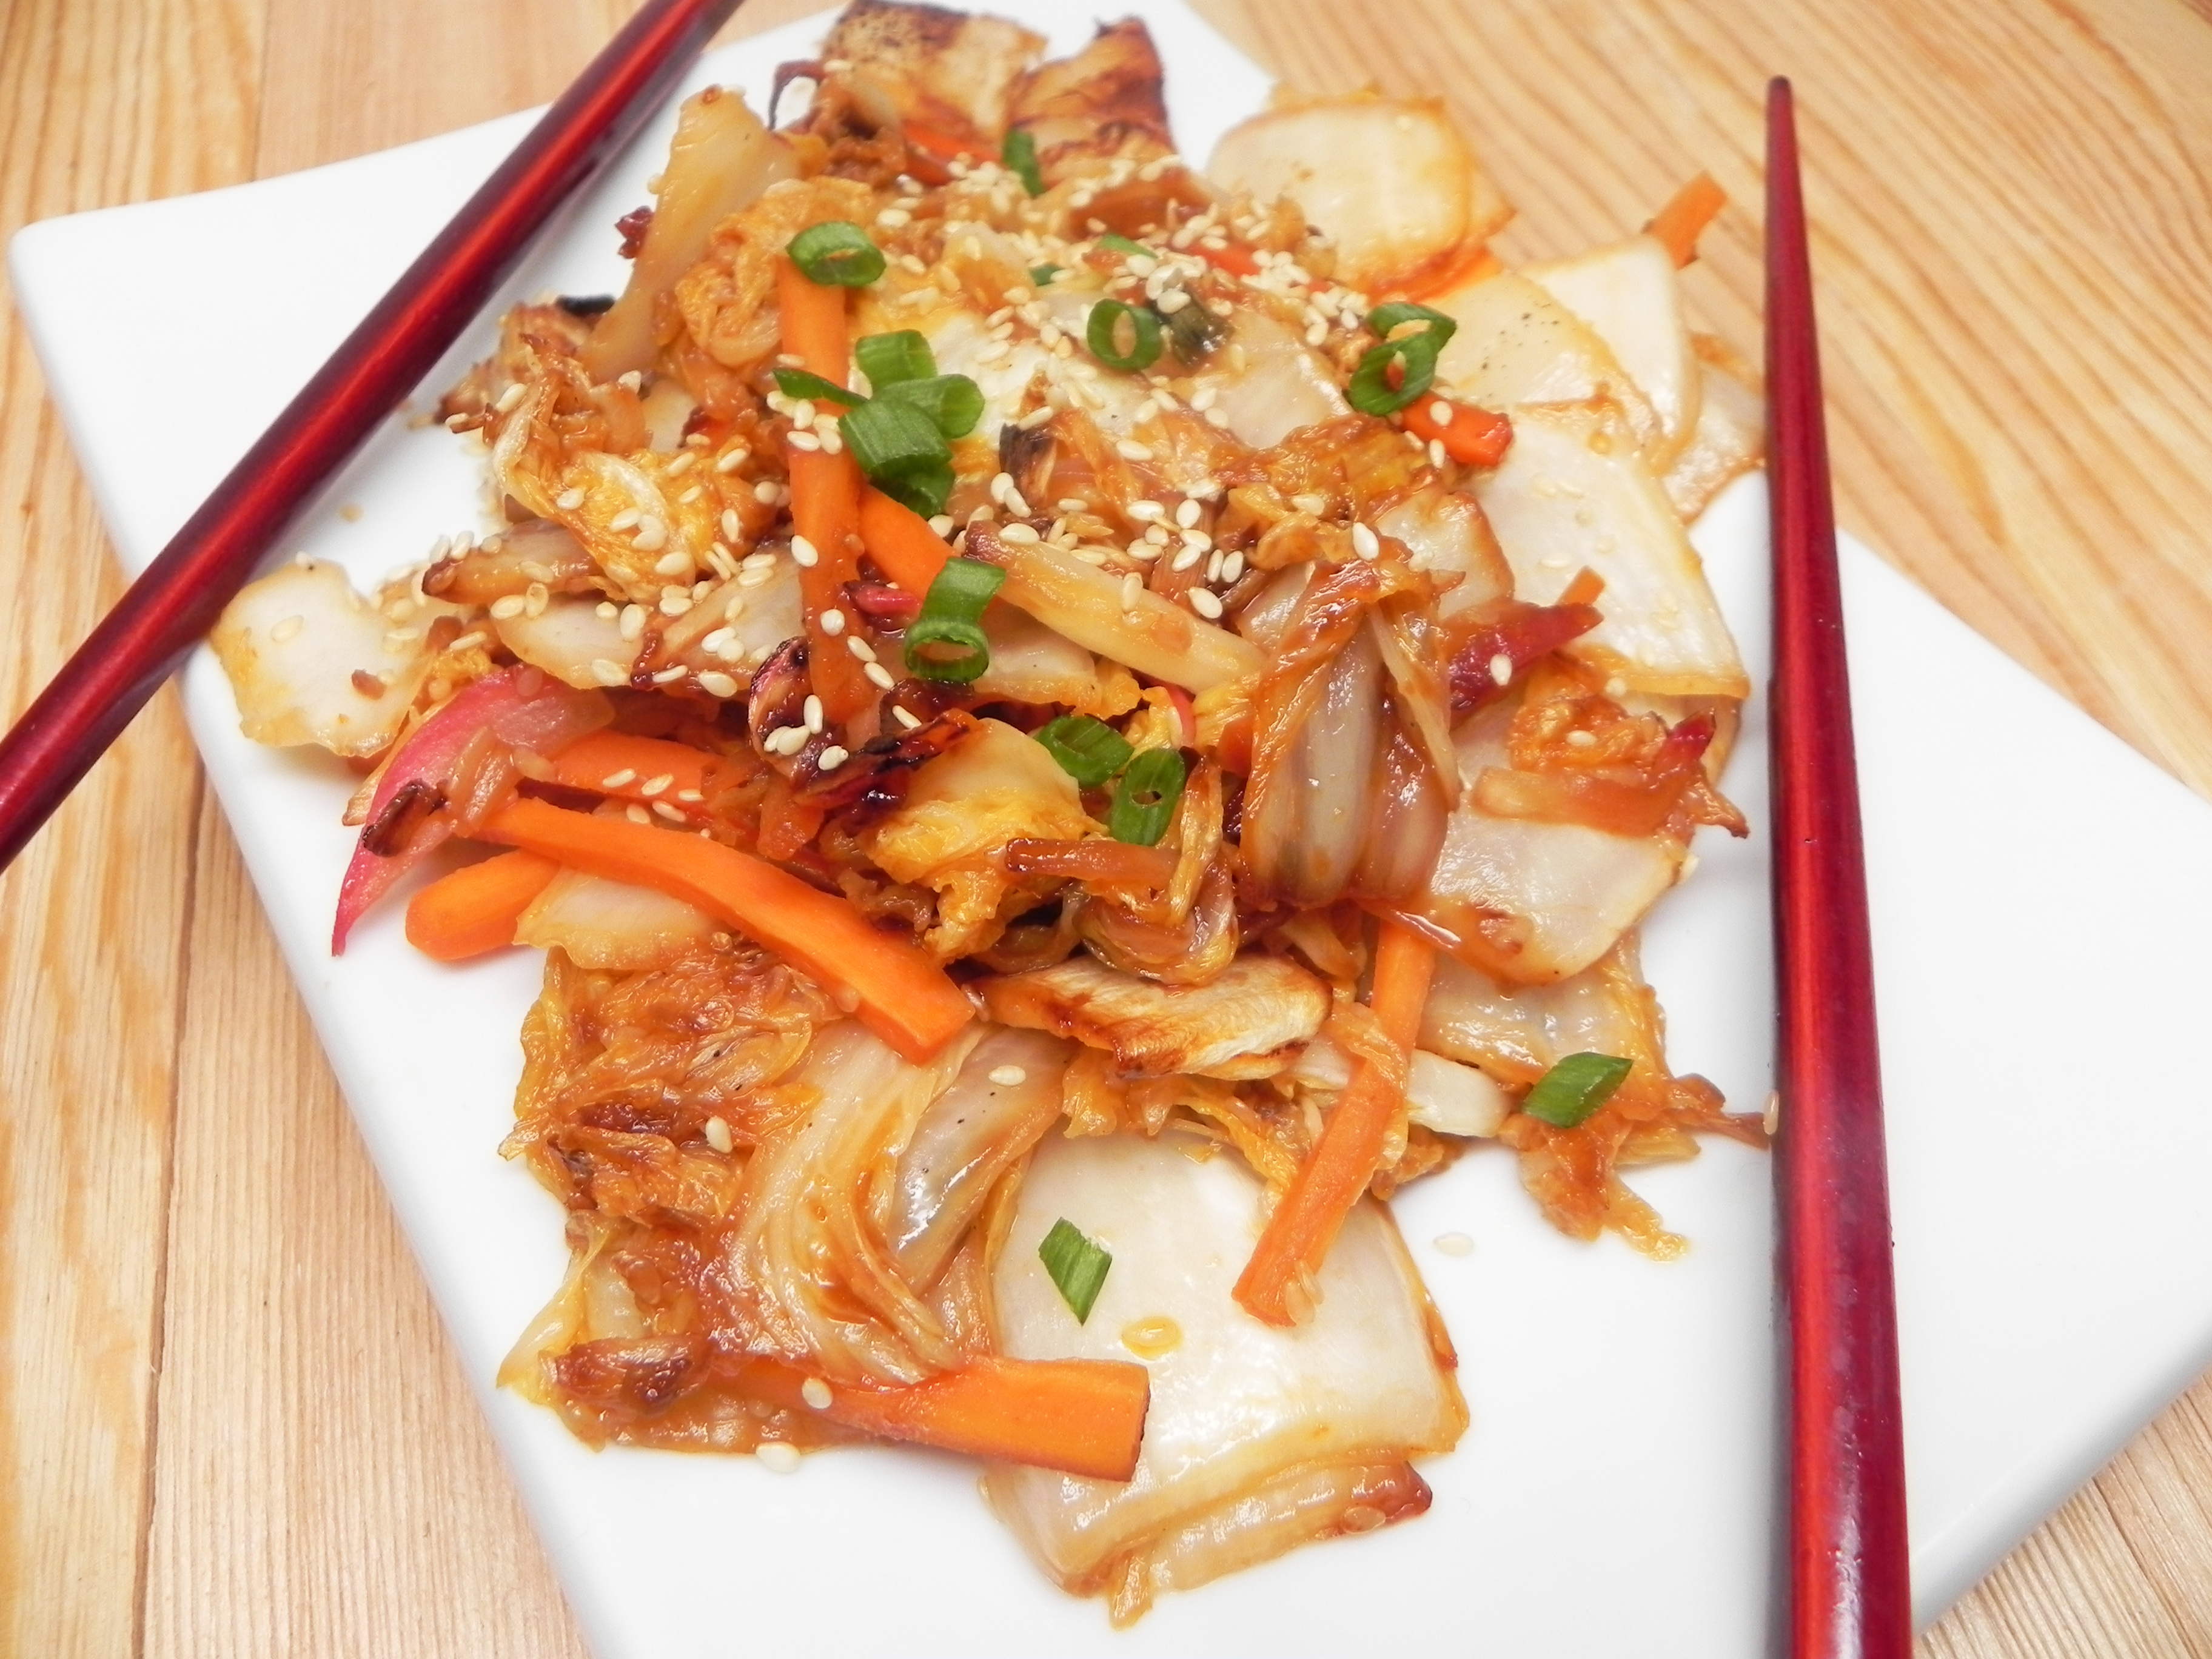 <p>"In this recipe, I fry some kimchi to completely alter the taste and texture for a smoky doppelganger! It is so great with Korean barbeque and with plain old rice. It is certainly one of my favorites and so easy to make. Enjoy hot or cold! Sprinkle sesame seeds on top as a garnish."</p>
                          